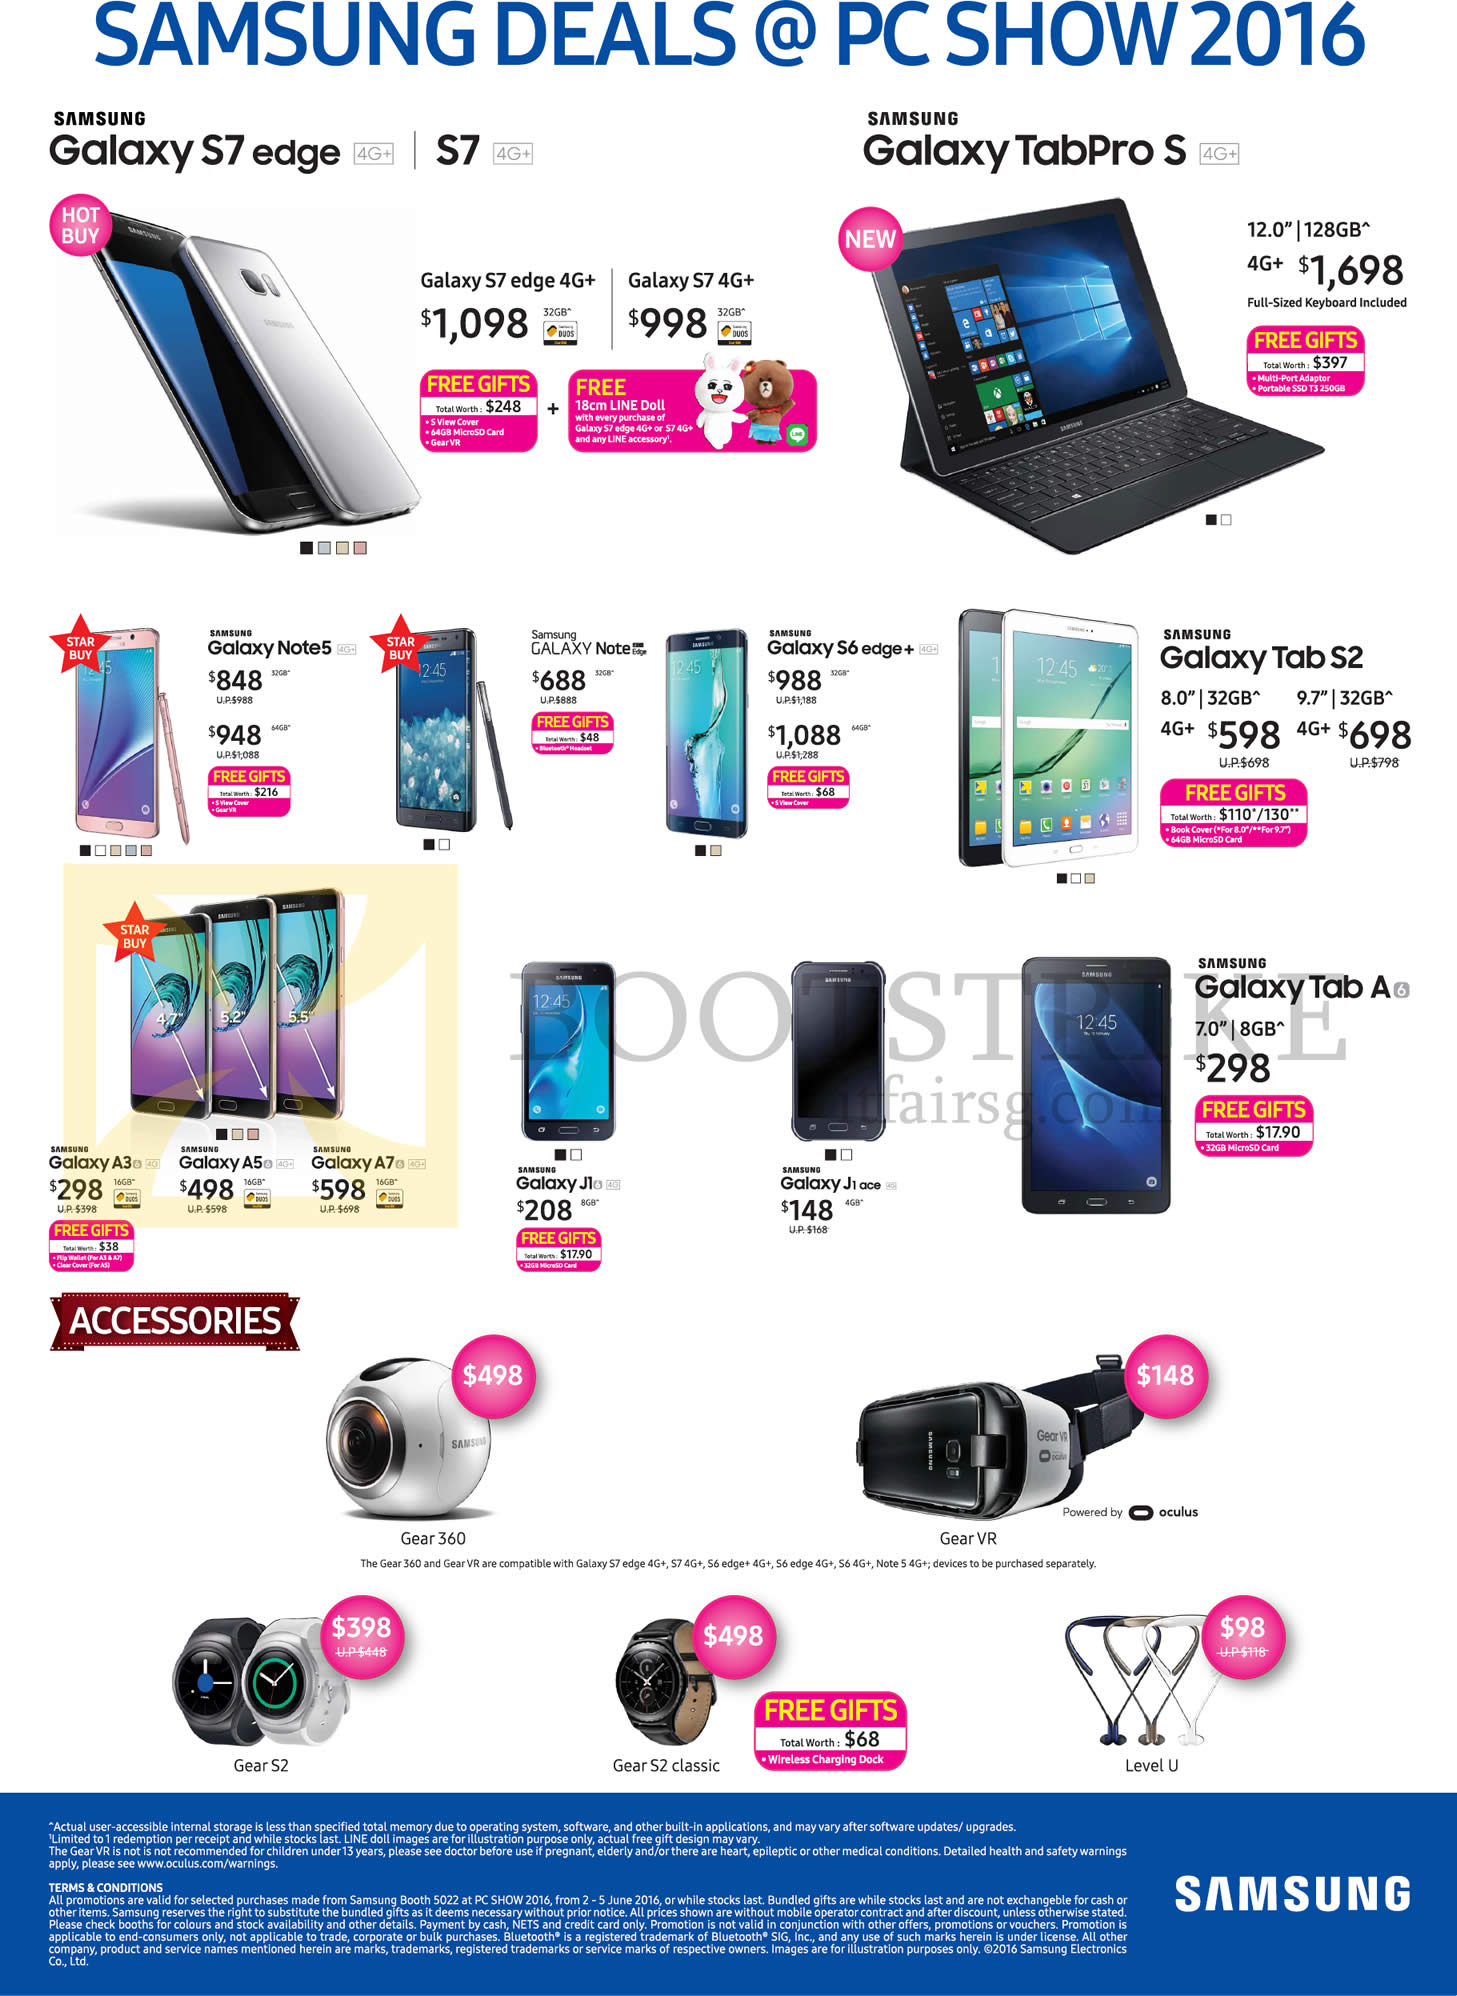 PC SHOW 2016 price list image brochure of Samsung Mobile Smartphones, Accessories, Galaxy S7 4G Plus, Edge, TabPRO S 12.0, Galaxy Note 5, Note Edge, S6 Edge Plus, Tab S2 8.0, 9.7, A3, A5, A7, J1, J1 Ace, Gear 360, VR